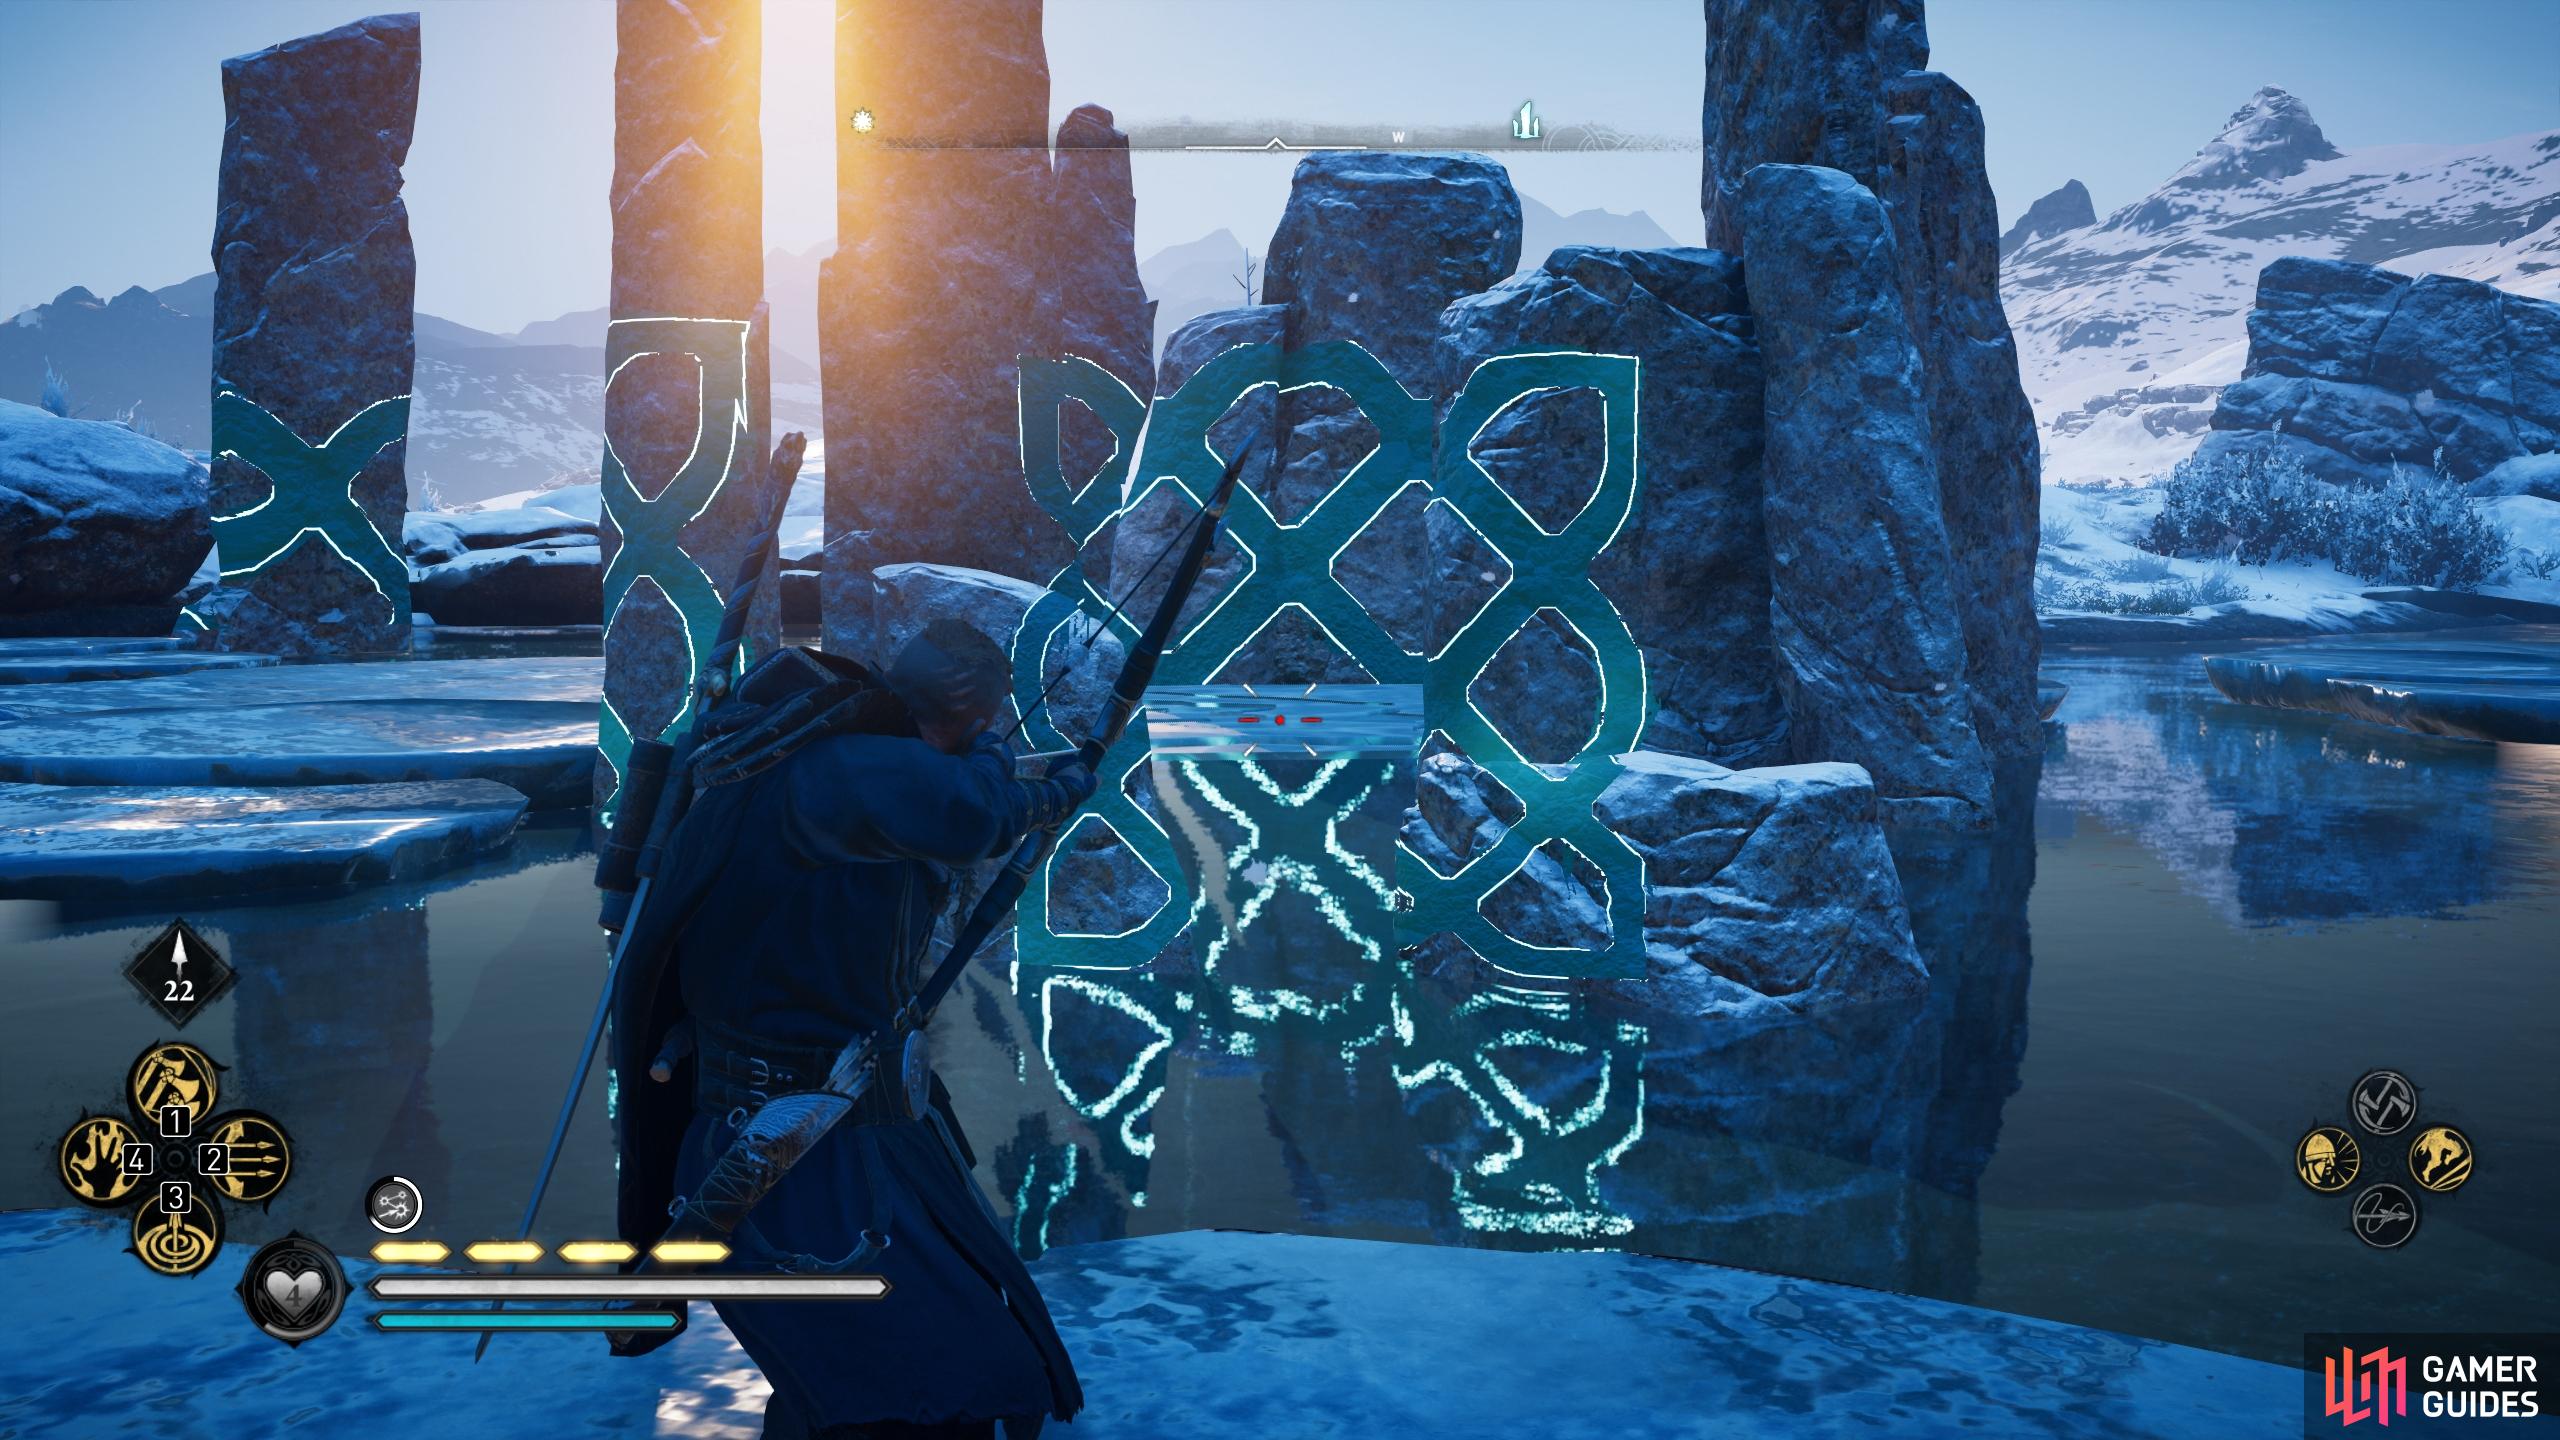 Youll need to destroy the ice at the centre of the symbol before you can align it.